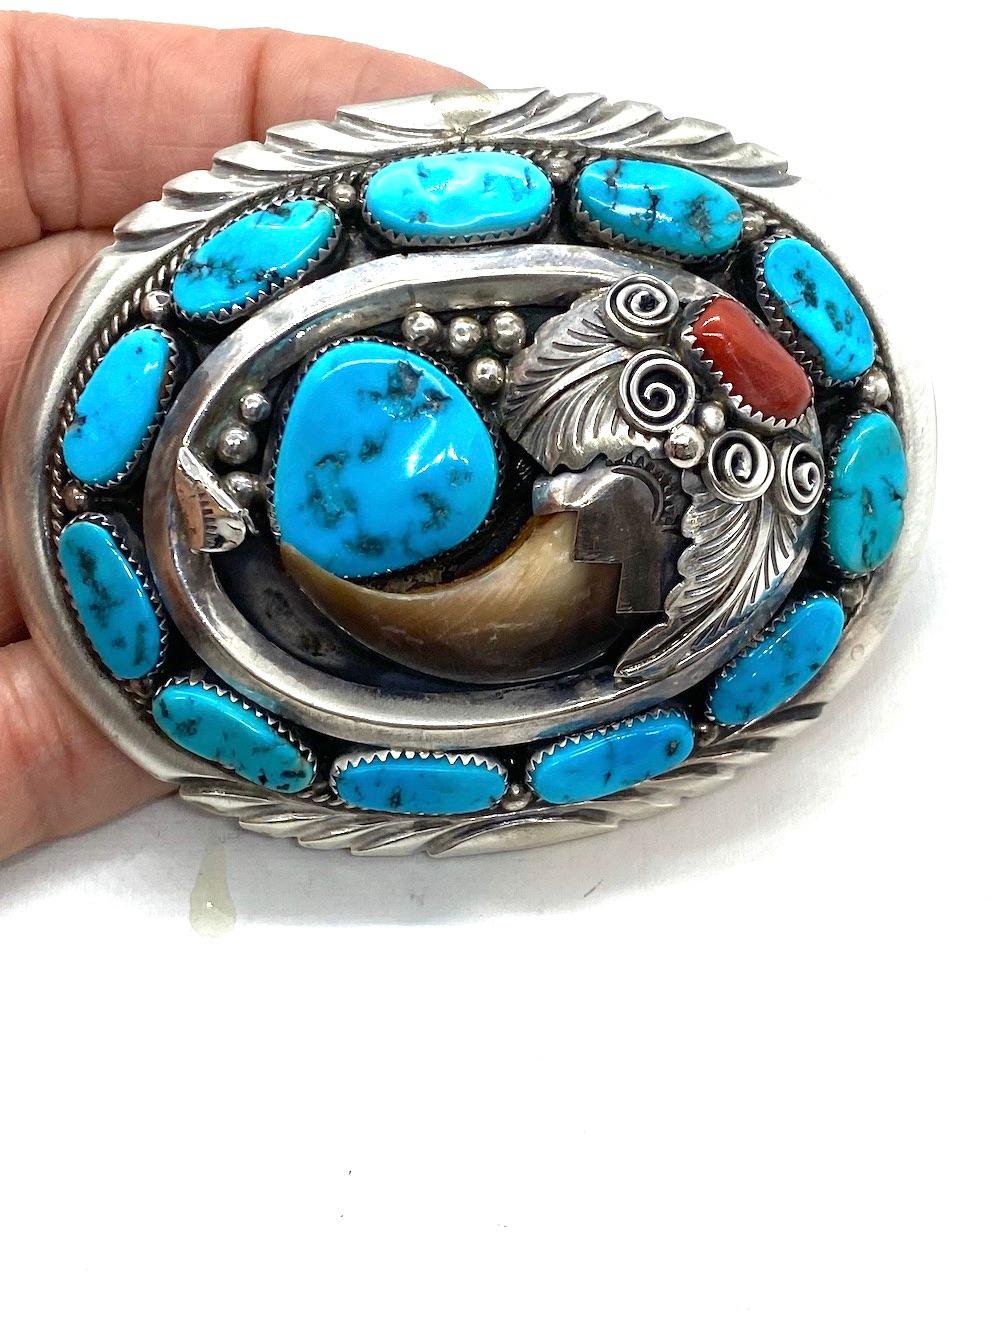 Handmade and intricately designed belt buckle features a large bear claw. The surrounding gemstones are turquoise and coral set in textured bezels.
Color of stones are rich and deep toned.
Bear claw is 2 inches long by 1-3/4 inch wide

Top of Buckle